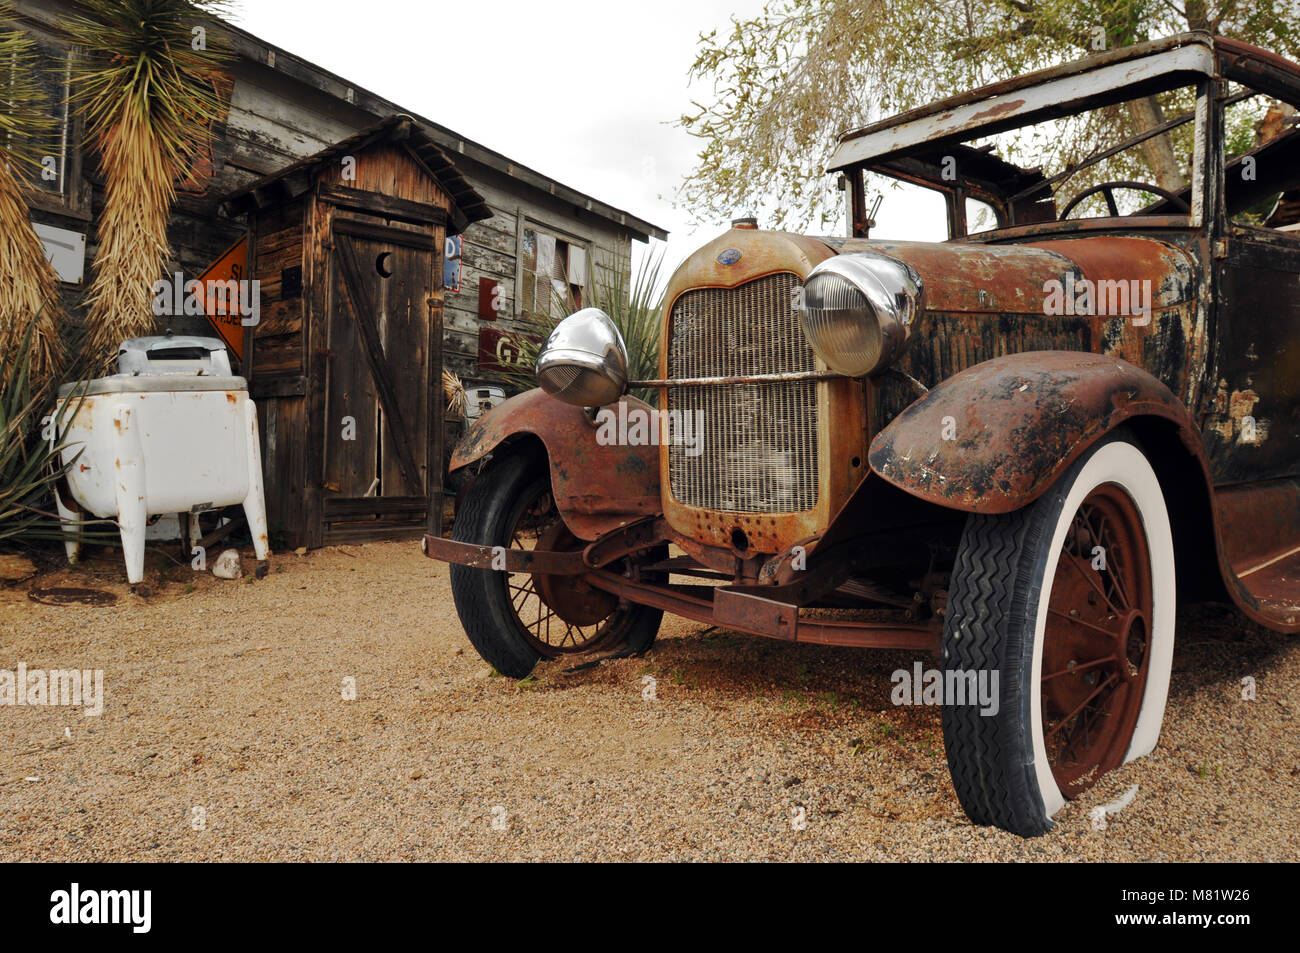 An outhouse and a rusty old Ford automobile are part of the display at the Hackberry General Store in Arizona, a Route 66 landmark. Stock Photo